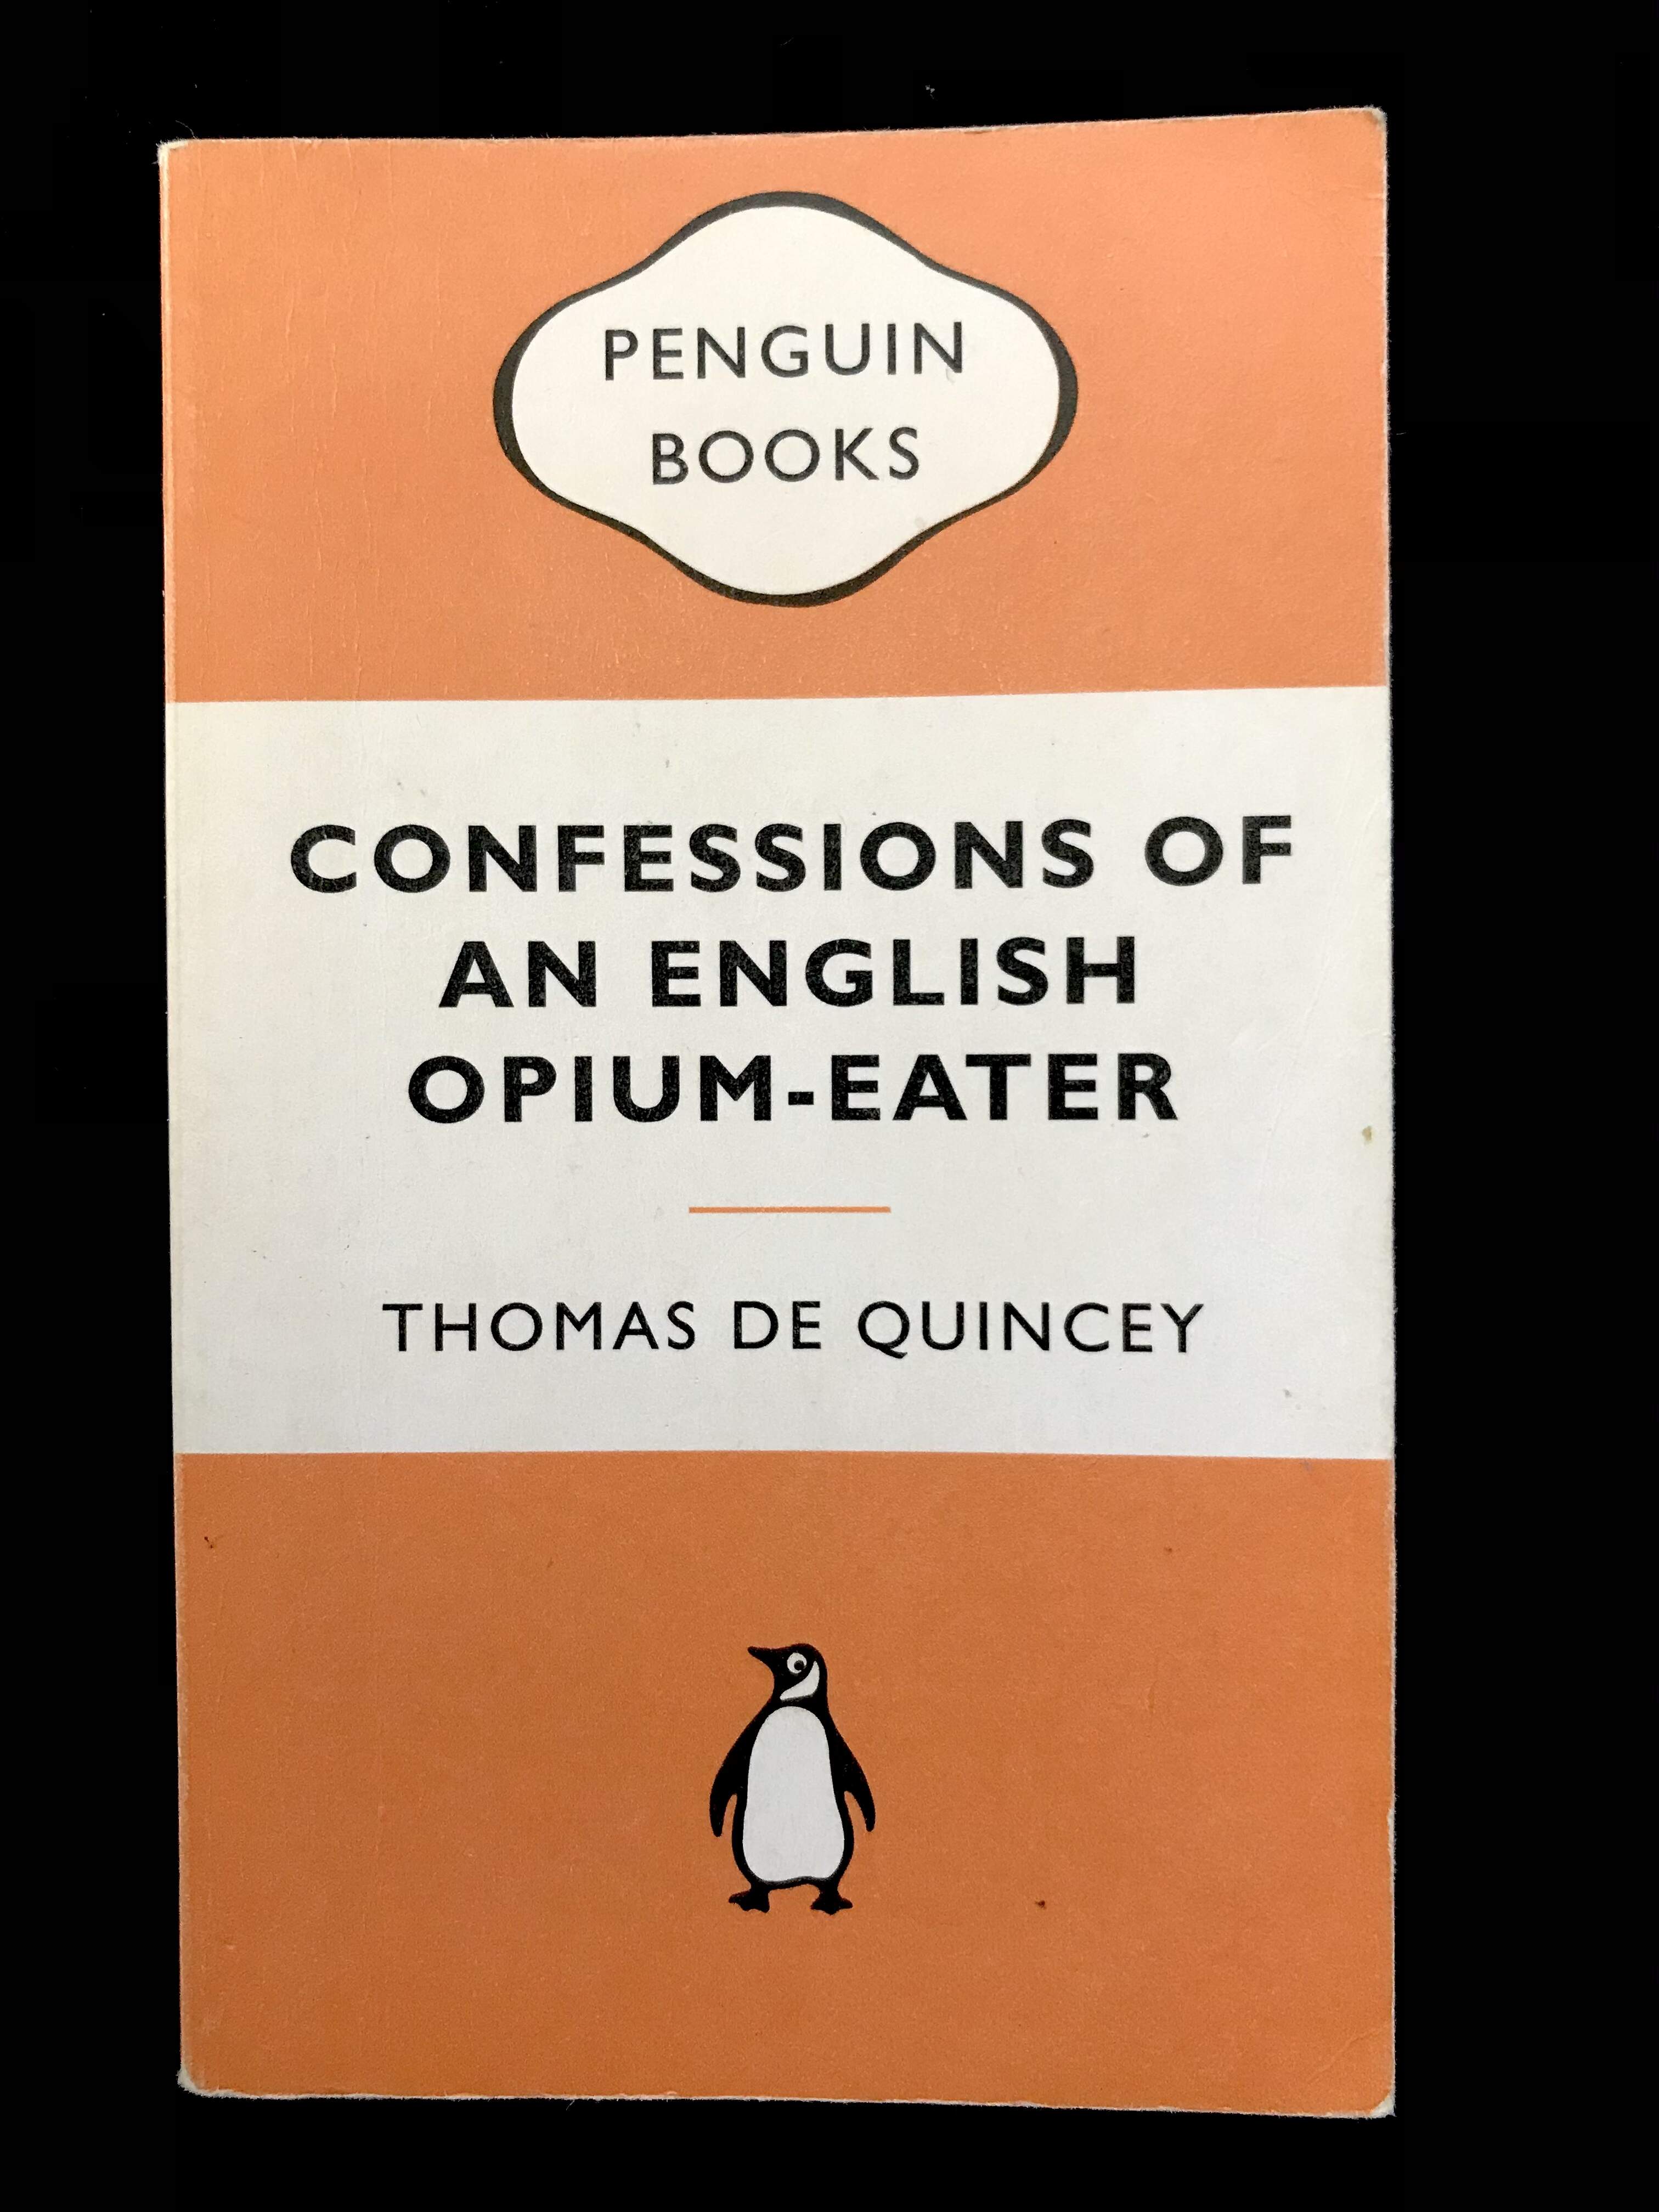 Confessions of An English Opium-Eater  by Thomas De Quincey